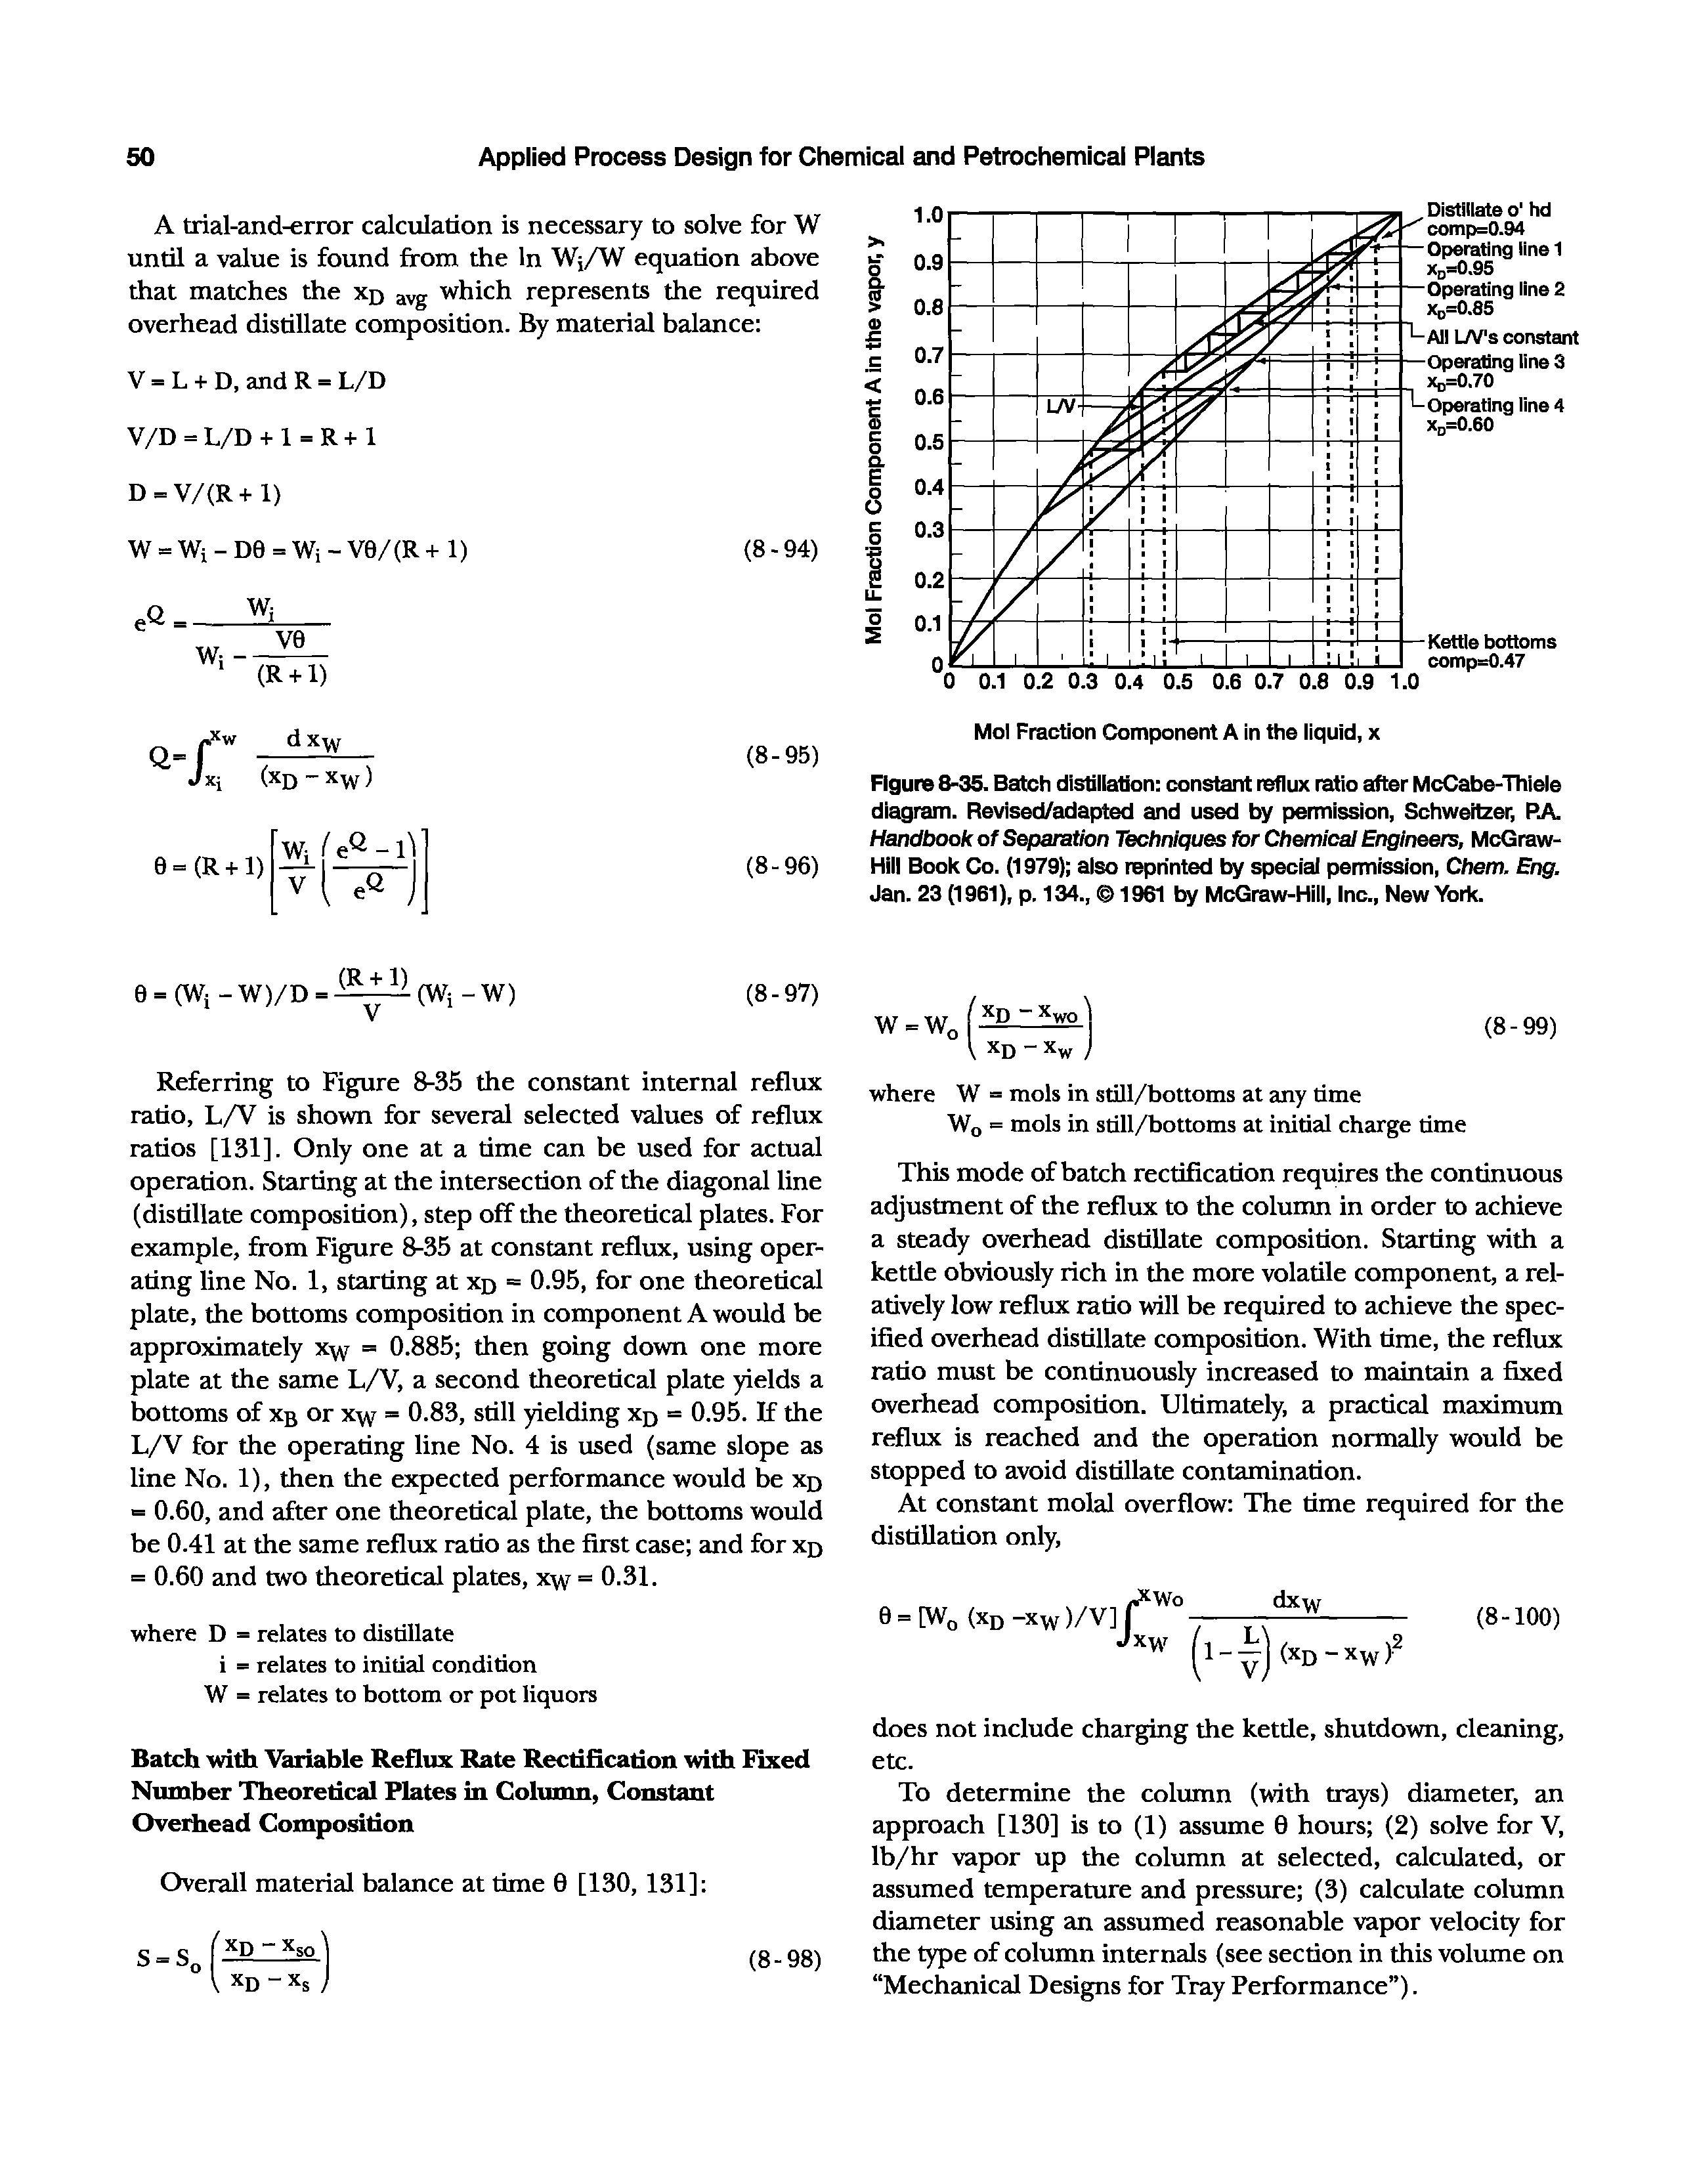 Figure 8-35. Batch distiilation constant reflux ratio after McCabe-Thieie diagram. Revised/adapted and used by pennission, Schweitzer, PA Handbook of Separation Techniques for Chemical Engineers, McGraw-Hiil Book Co. (1979) aiso reprinted by special permission, Chem. Eng. Jan. 23 (1961), p. 134., 1961 by McGraw-Hili, Inc., New York.